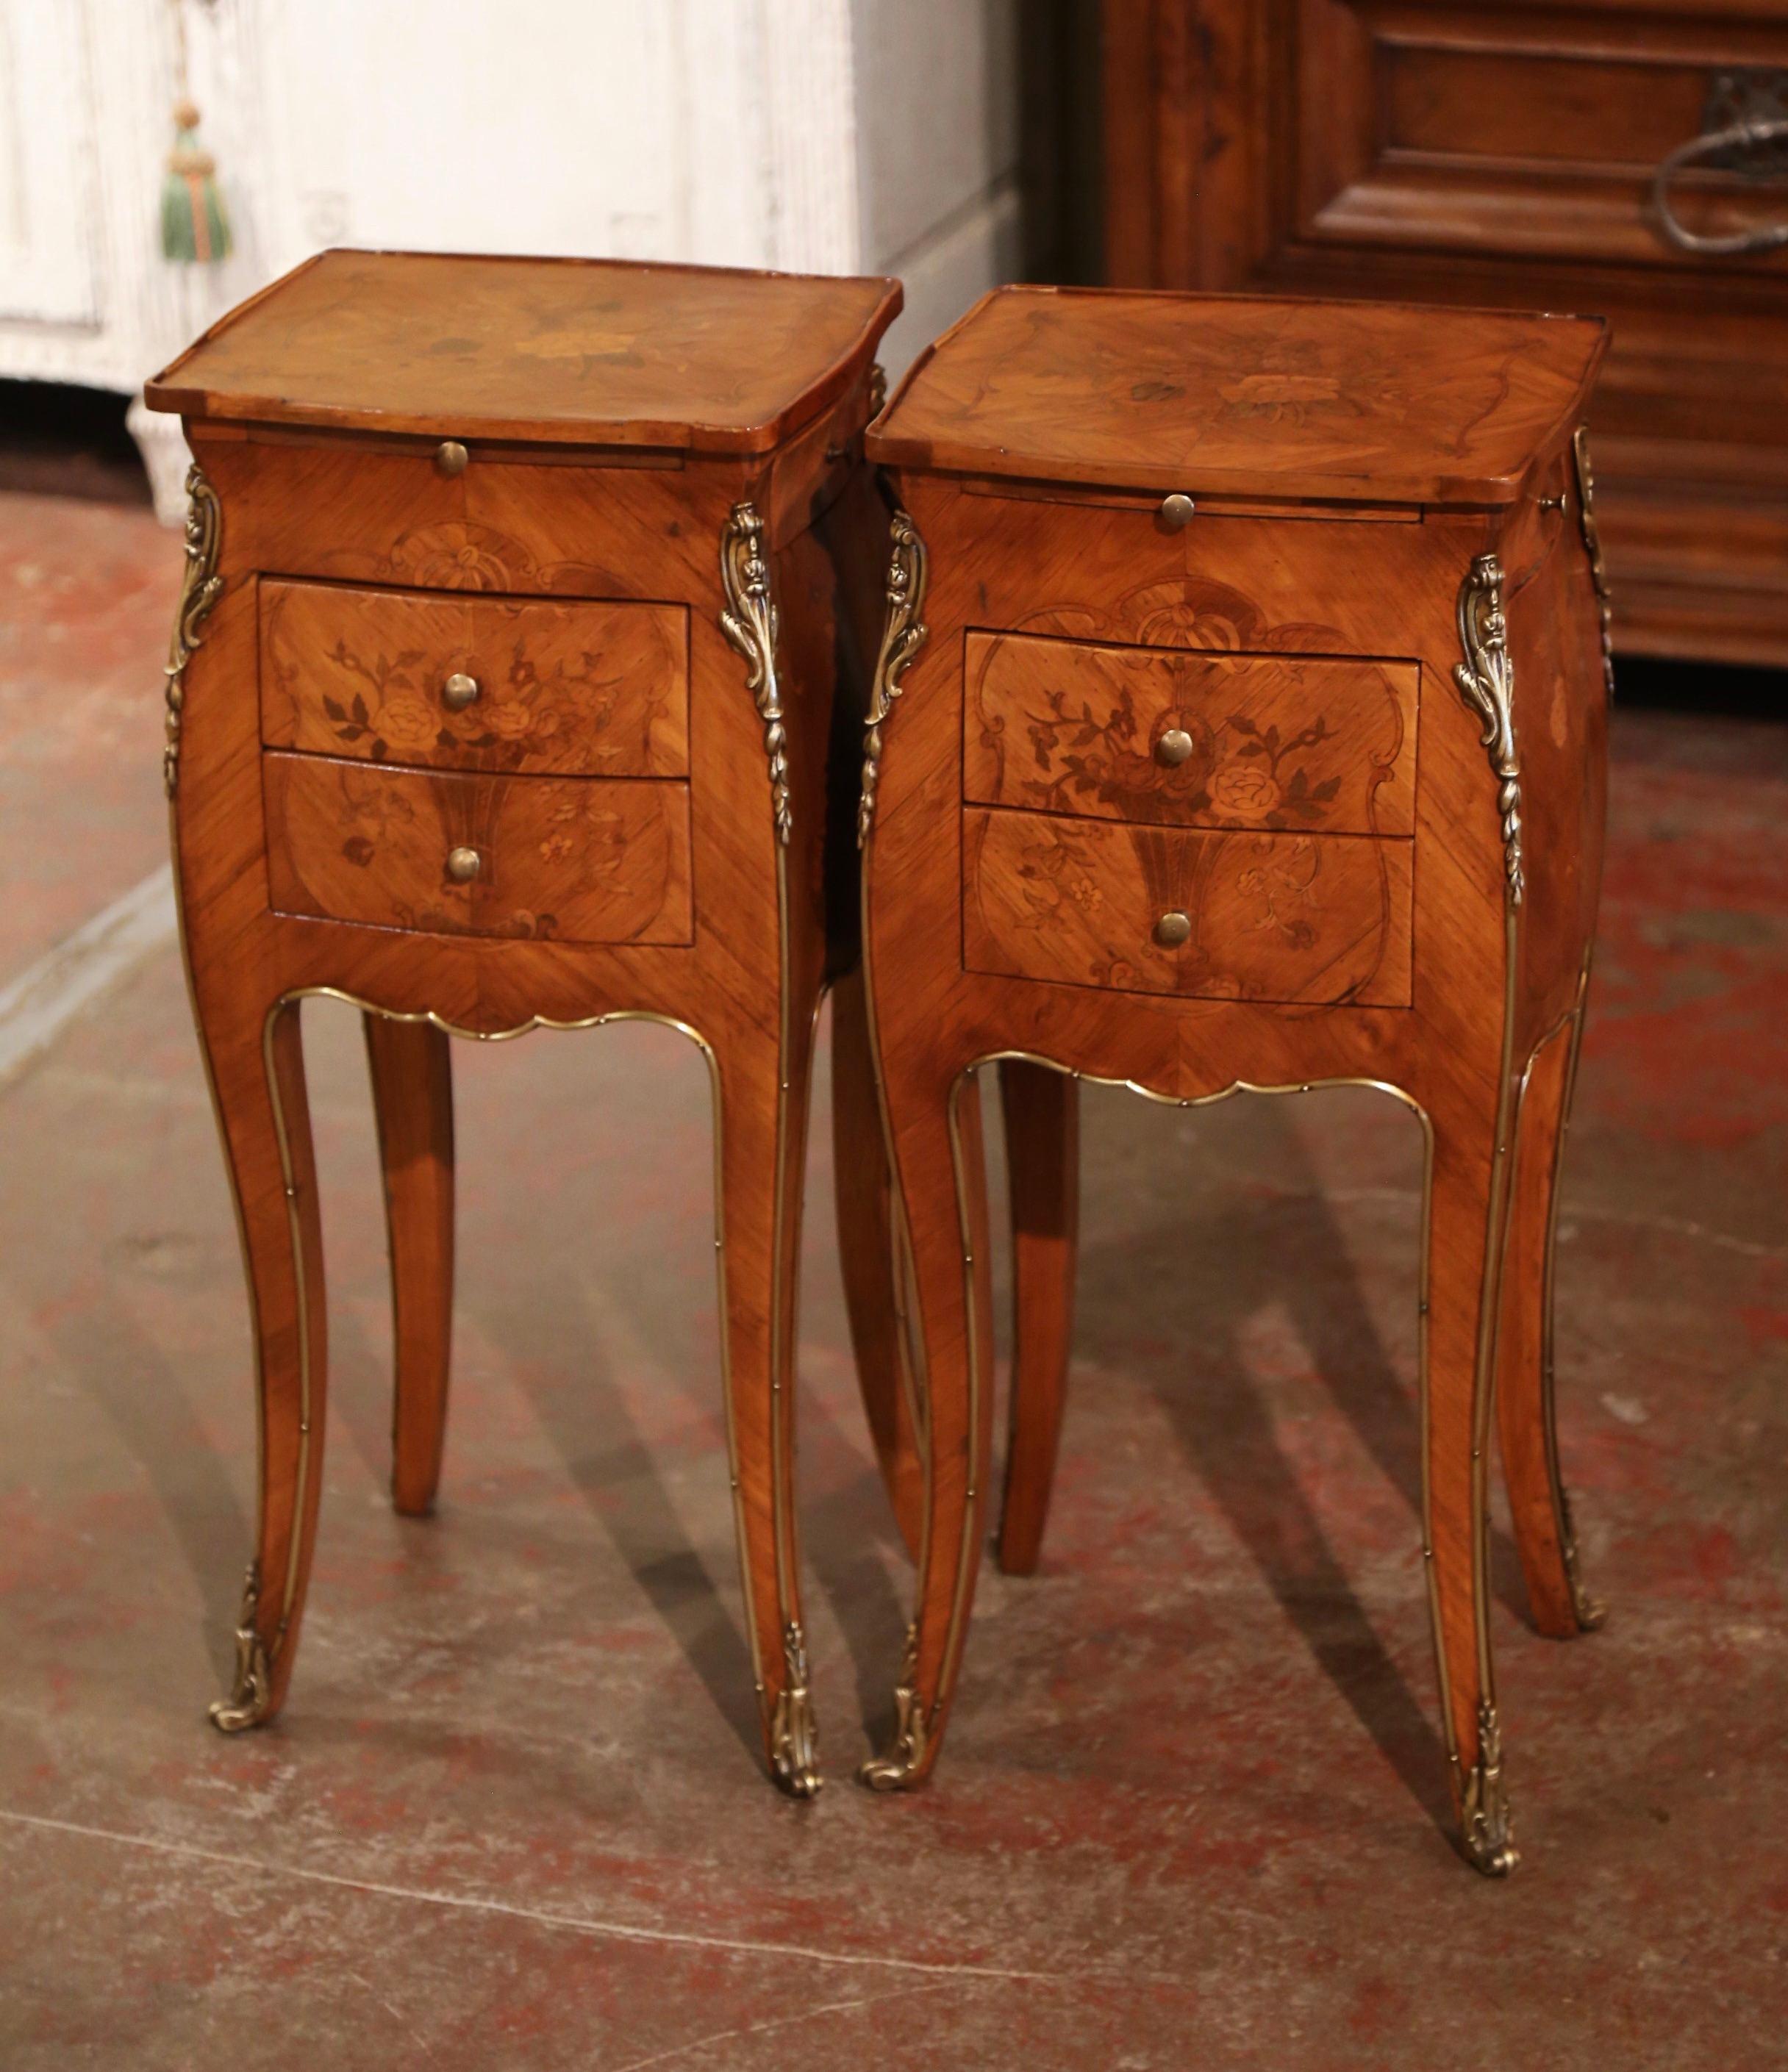 These elegant bedside tables were created in France, circa 1920. Bombe in shape on all three sides, each fruitwood cabinets stands on cabriole legs decorated with brass embellishments and ending with bronze sabot feet; the front features a scalloped